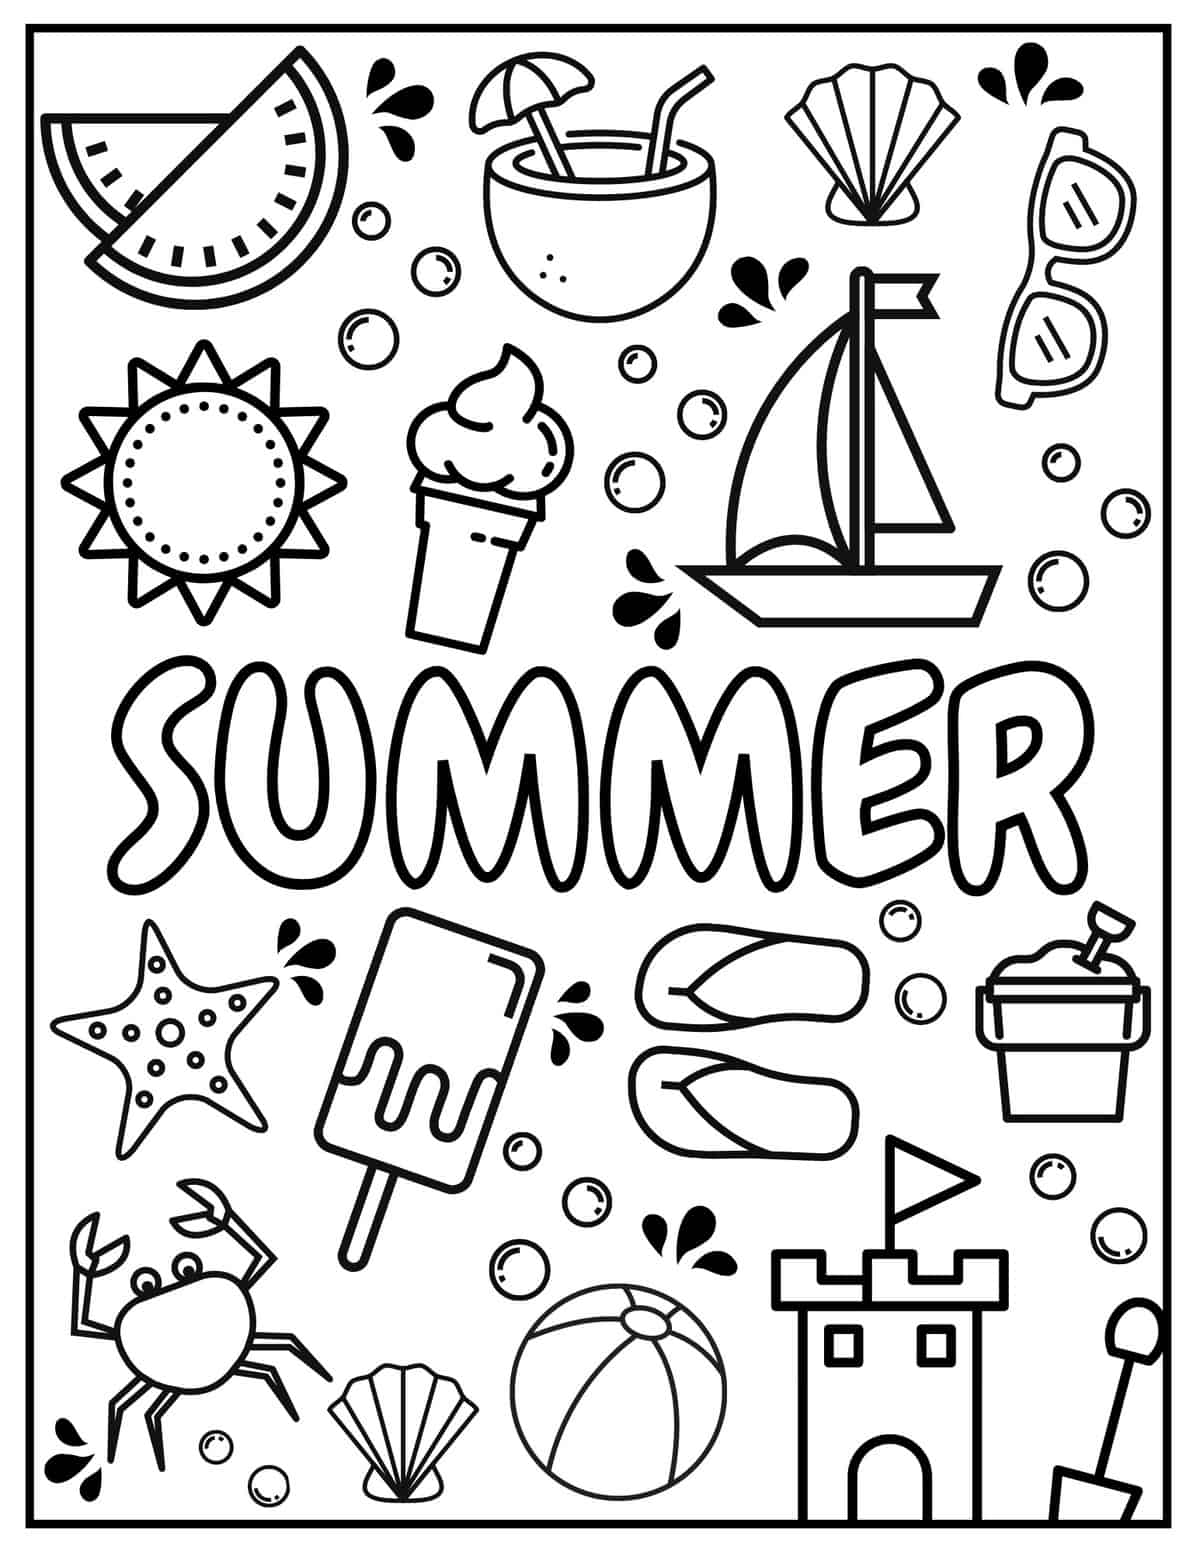 Preschool Summer Coloring Pages peacecommission kdsg gov ng